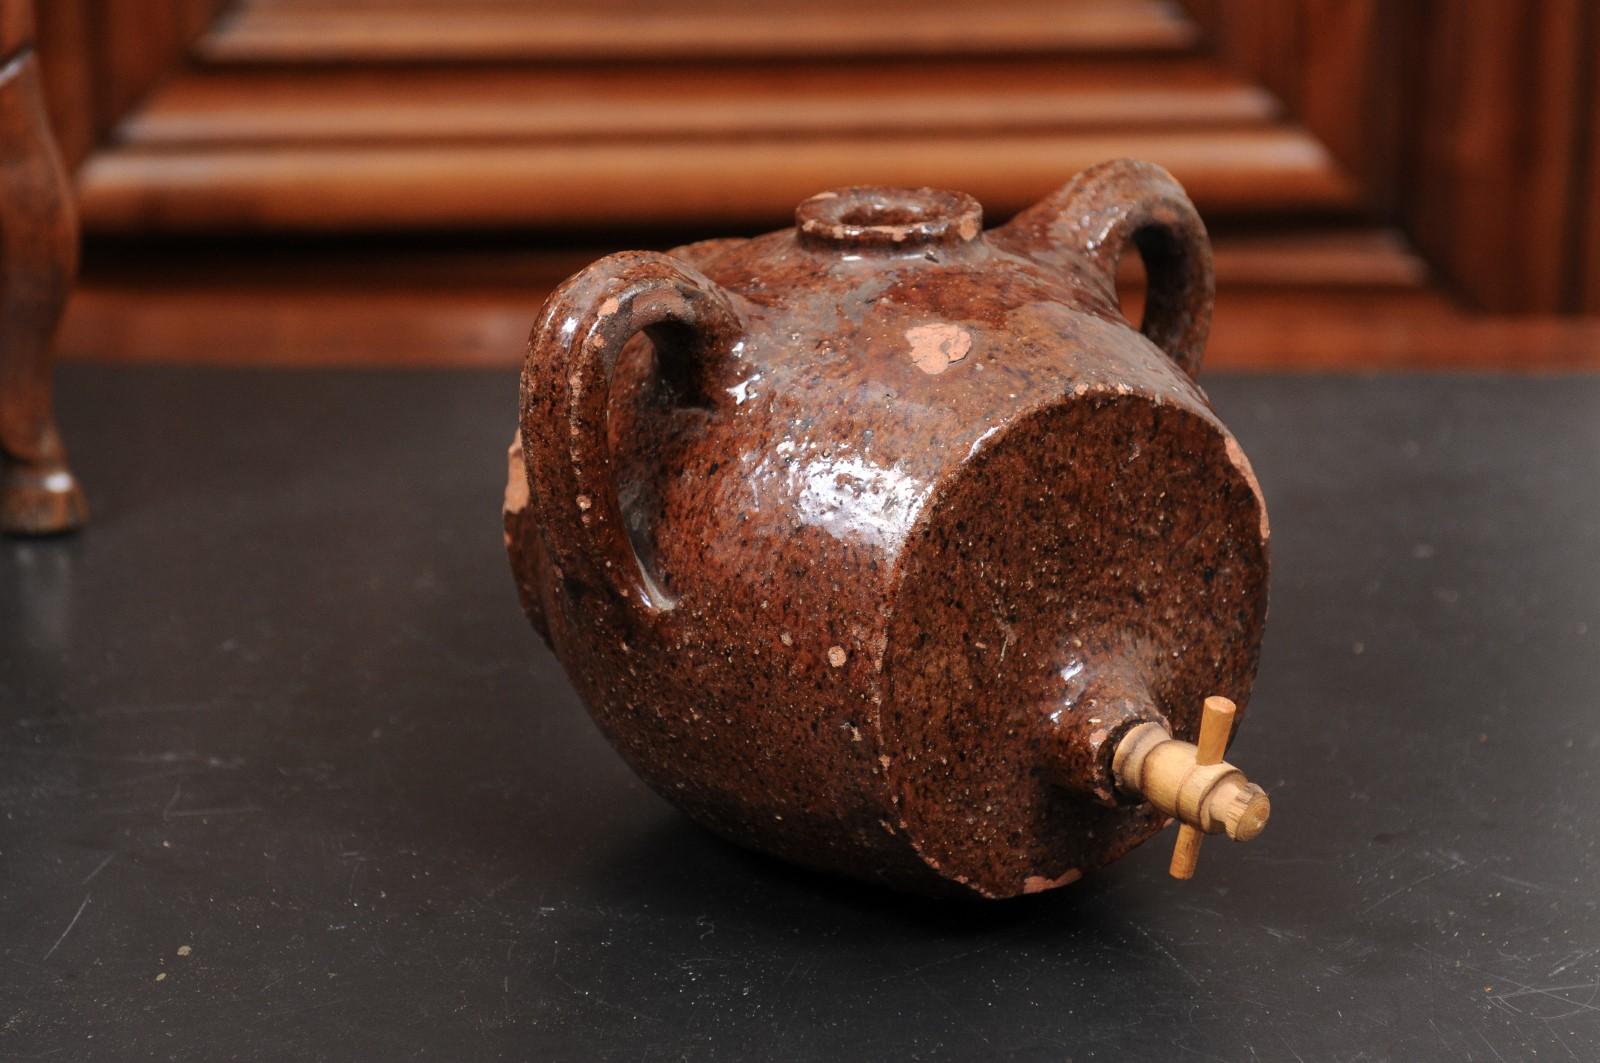 A French terracotta vinegar pot from the 19th century, with chocolate glaze and nicely worn appearance. Created in France during the 19th century, this terracotta vinegar pot charms us with its chocolate glaze and aged patina. Flanked with handles